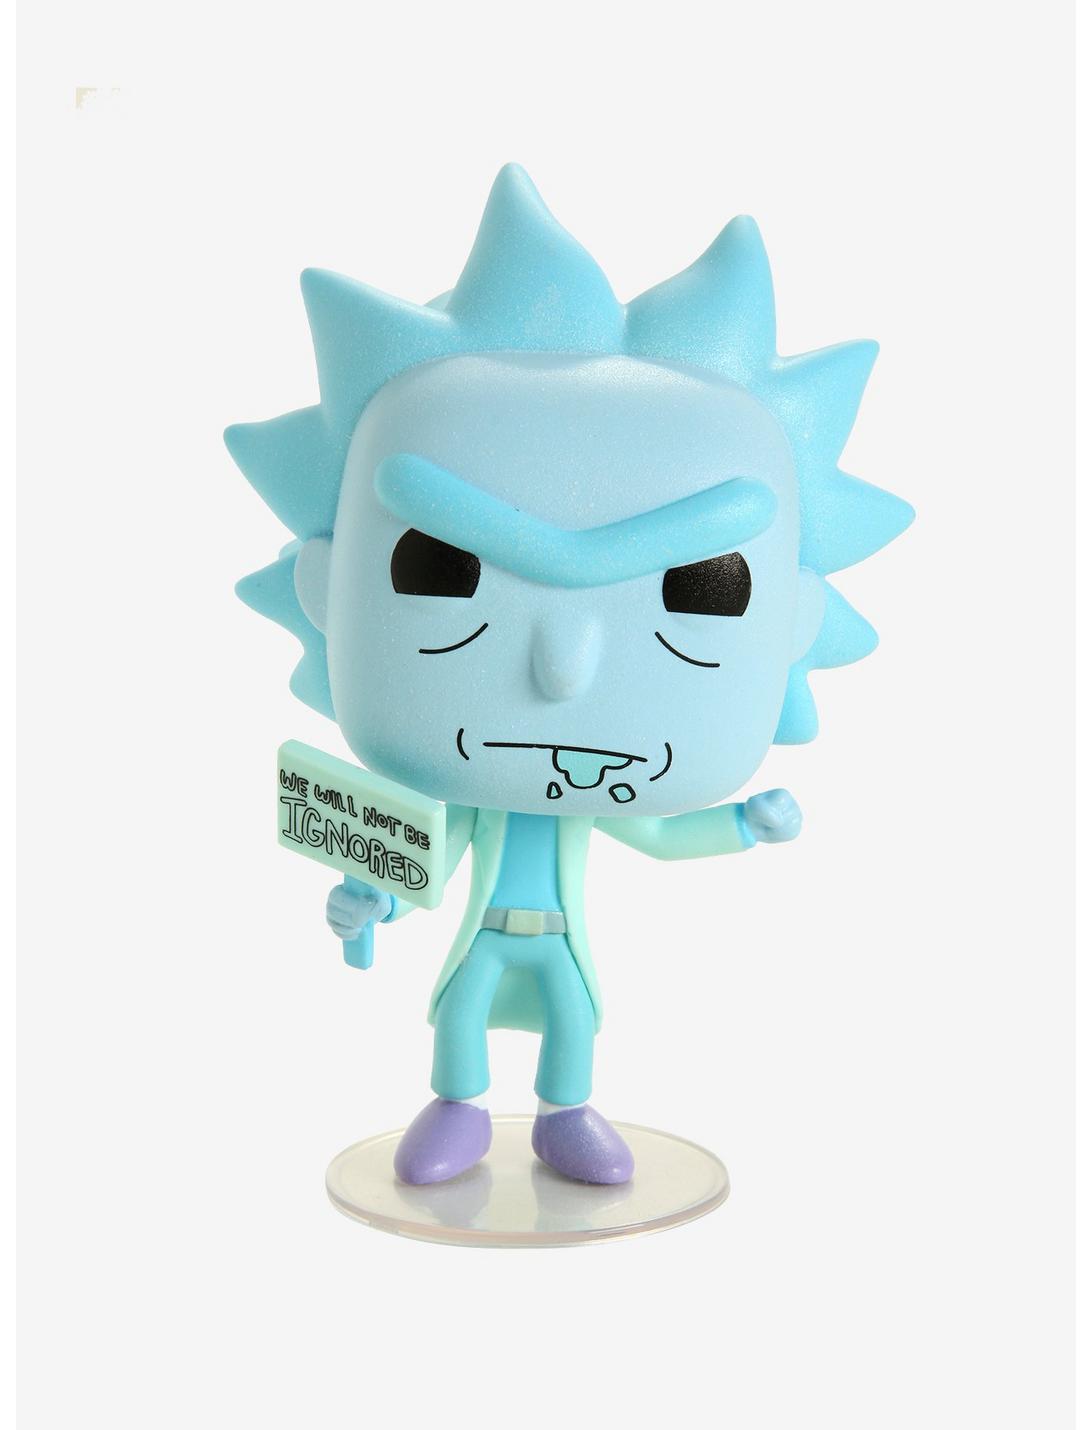 Funko Rick And Morty Pop! Animation Hologram Rick Clone Glow-In-The-Dark Vinyl Figure Hot Topic Exclusive, , hi-res